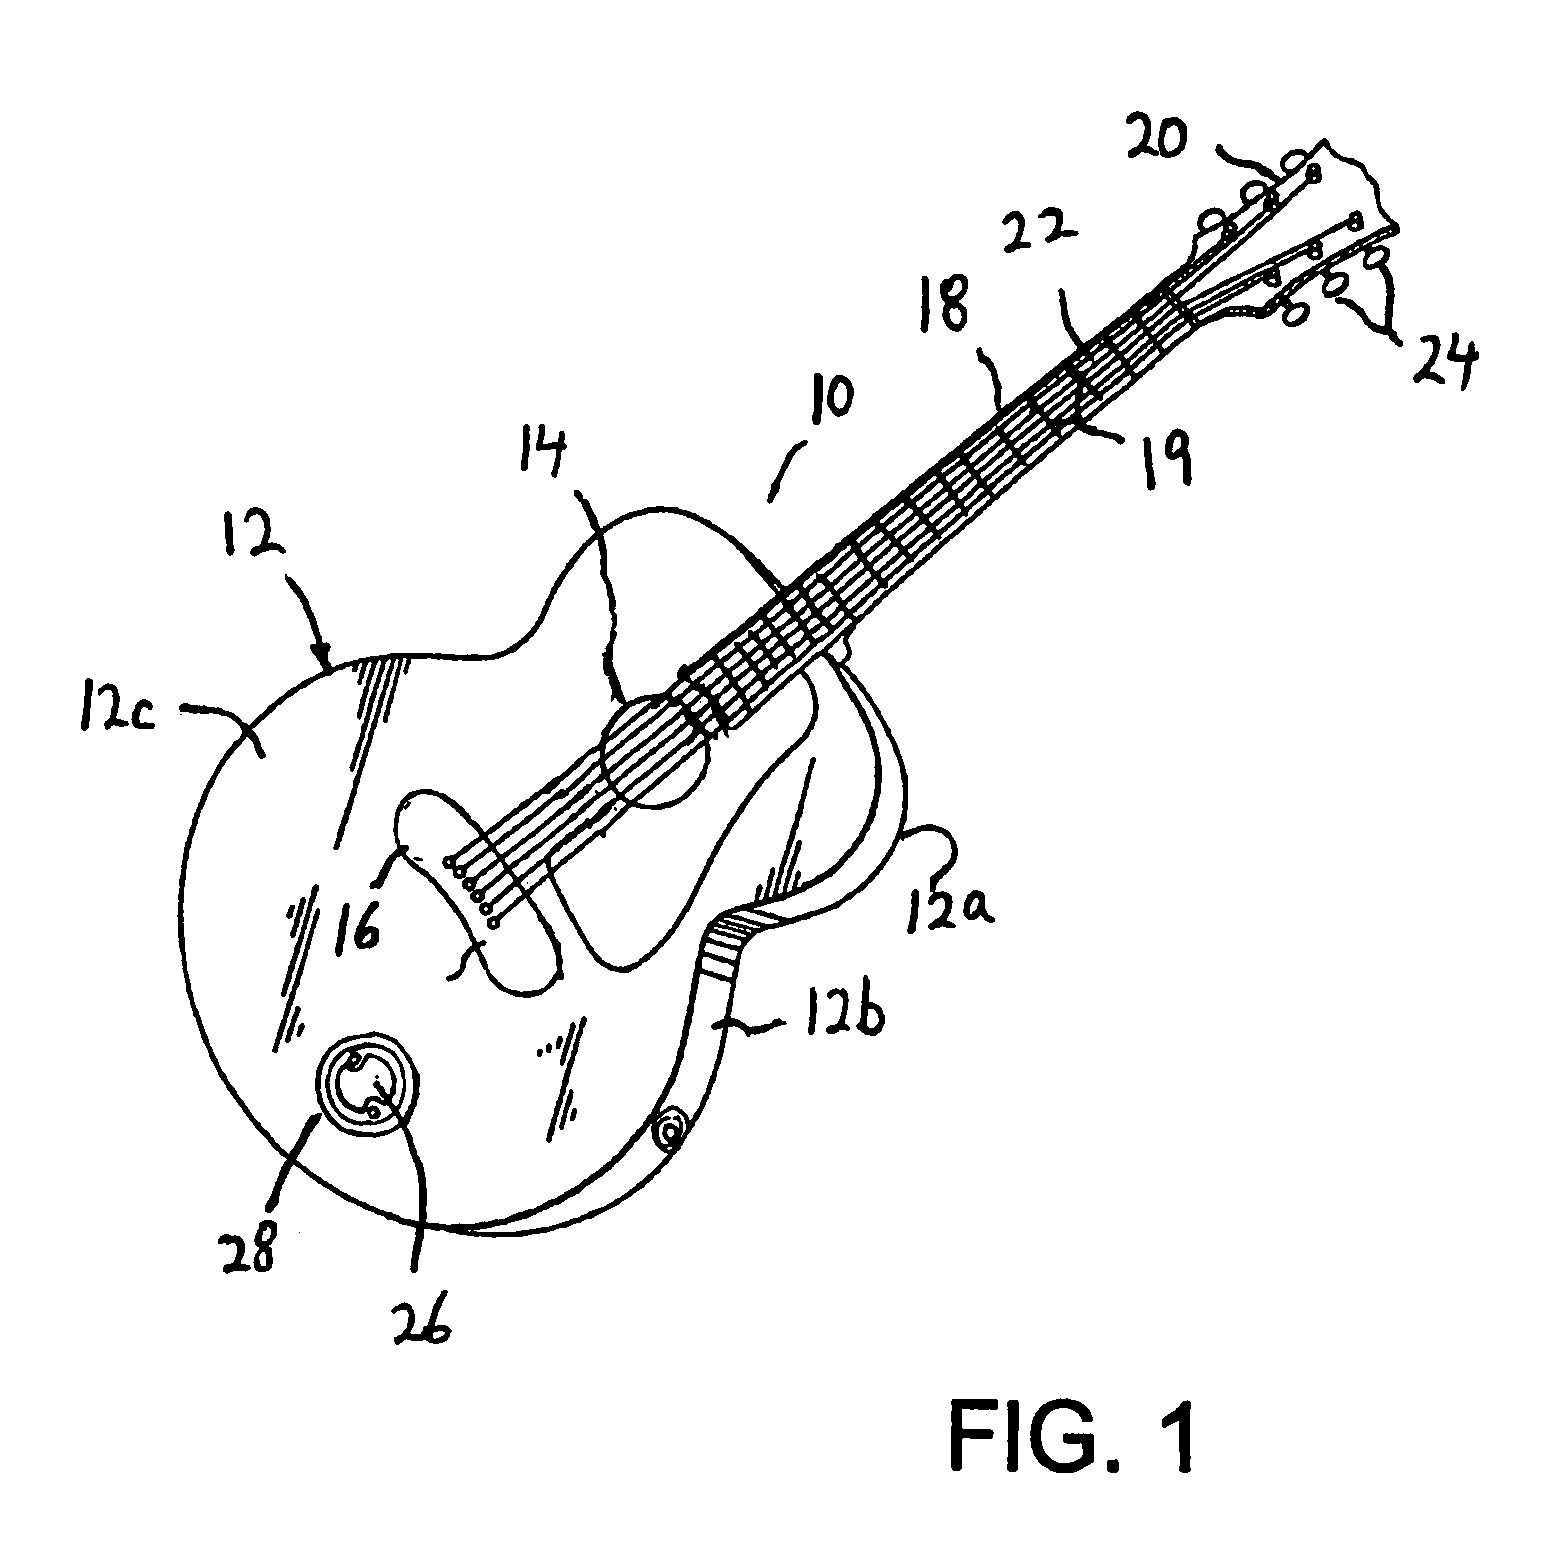 String instrument with variable openings